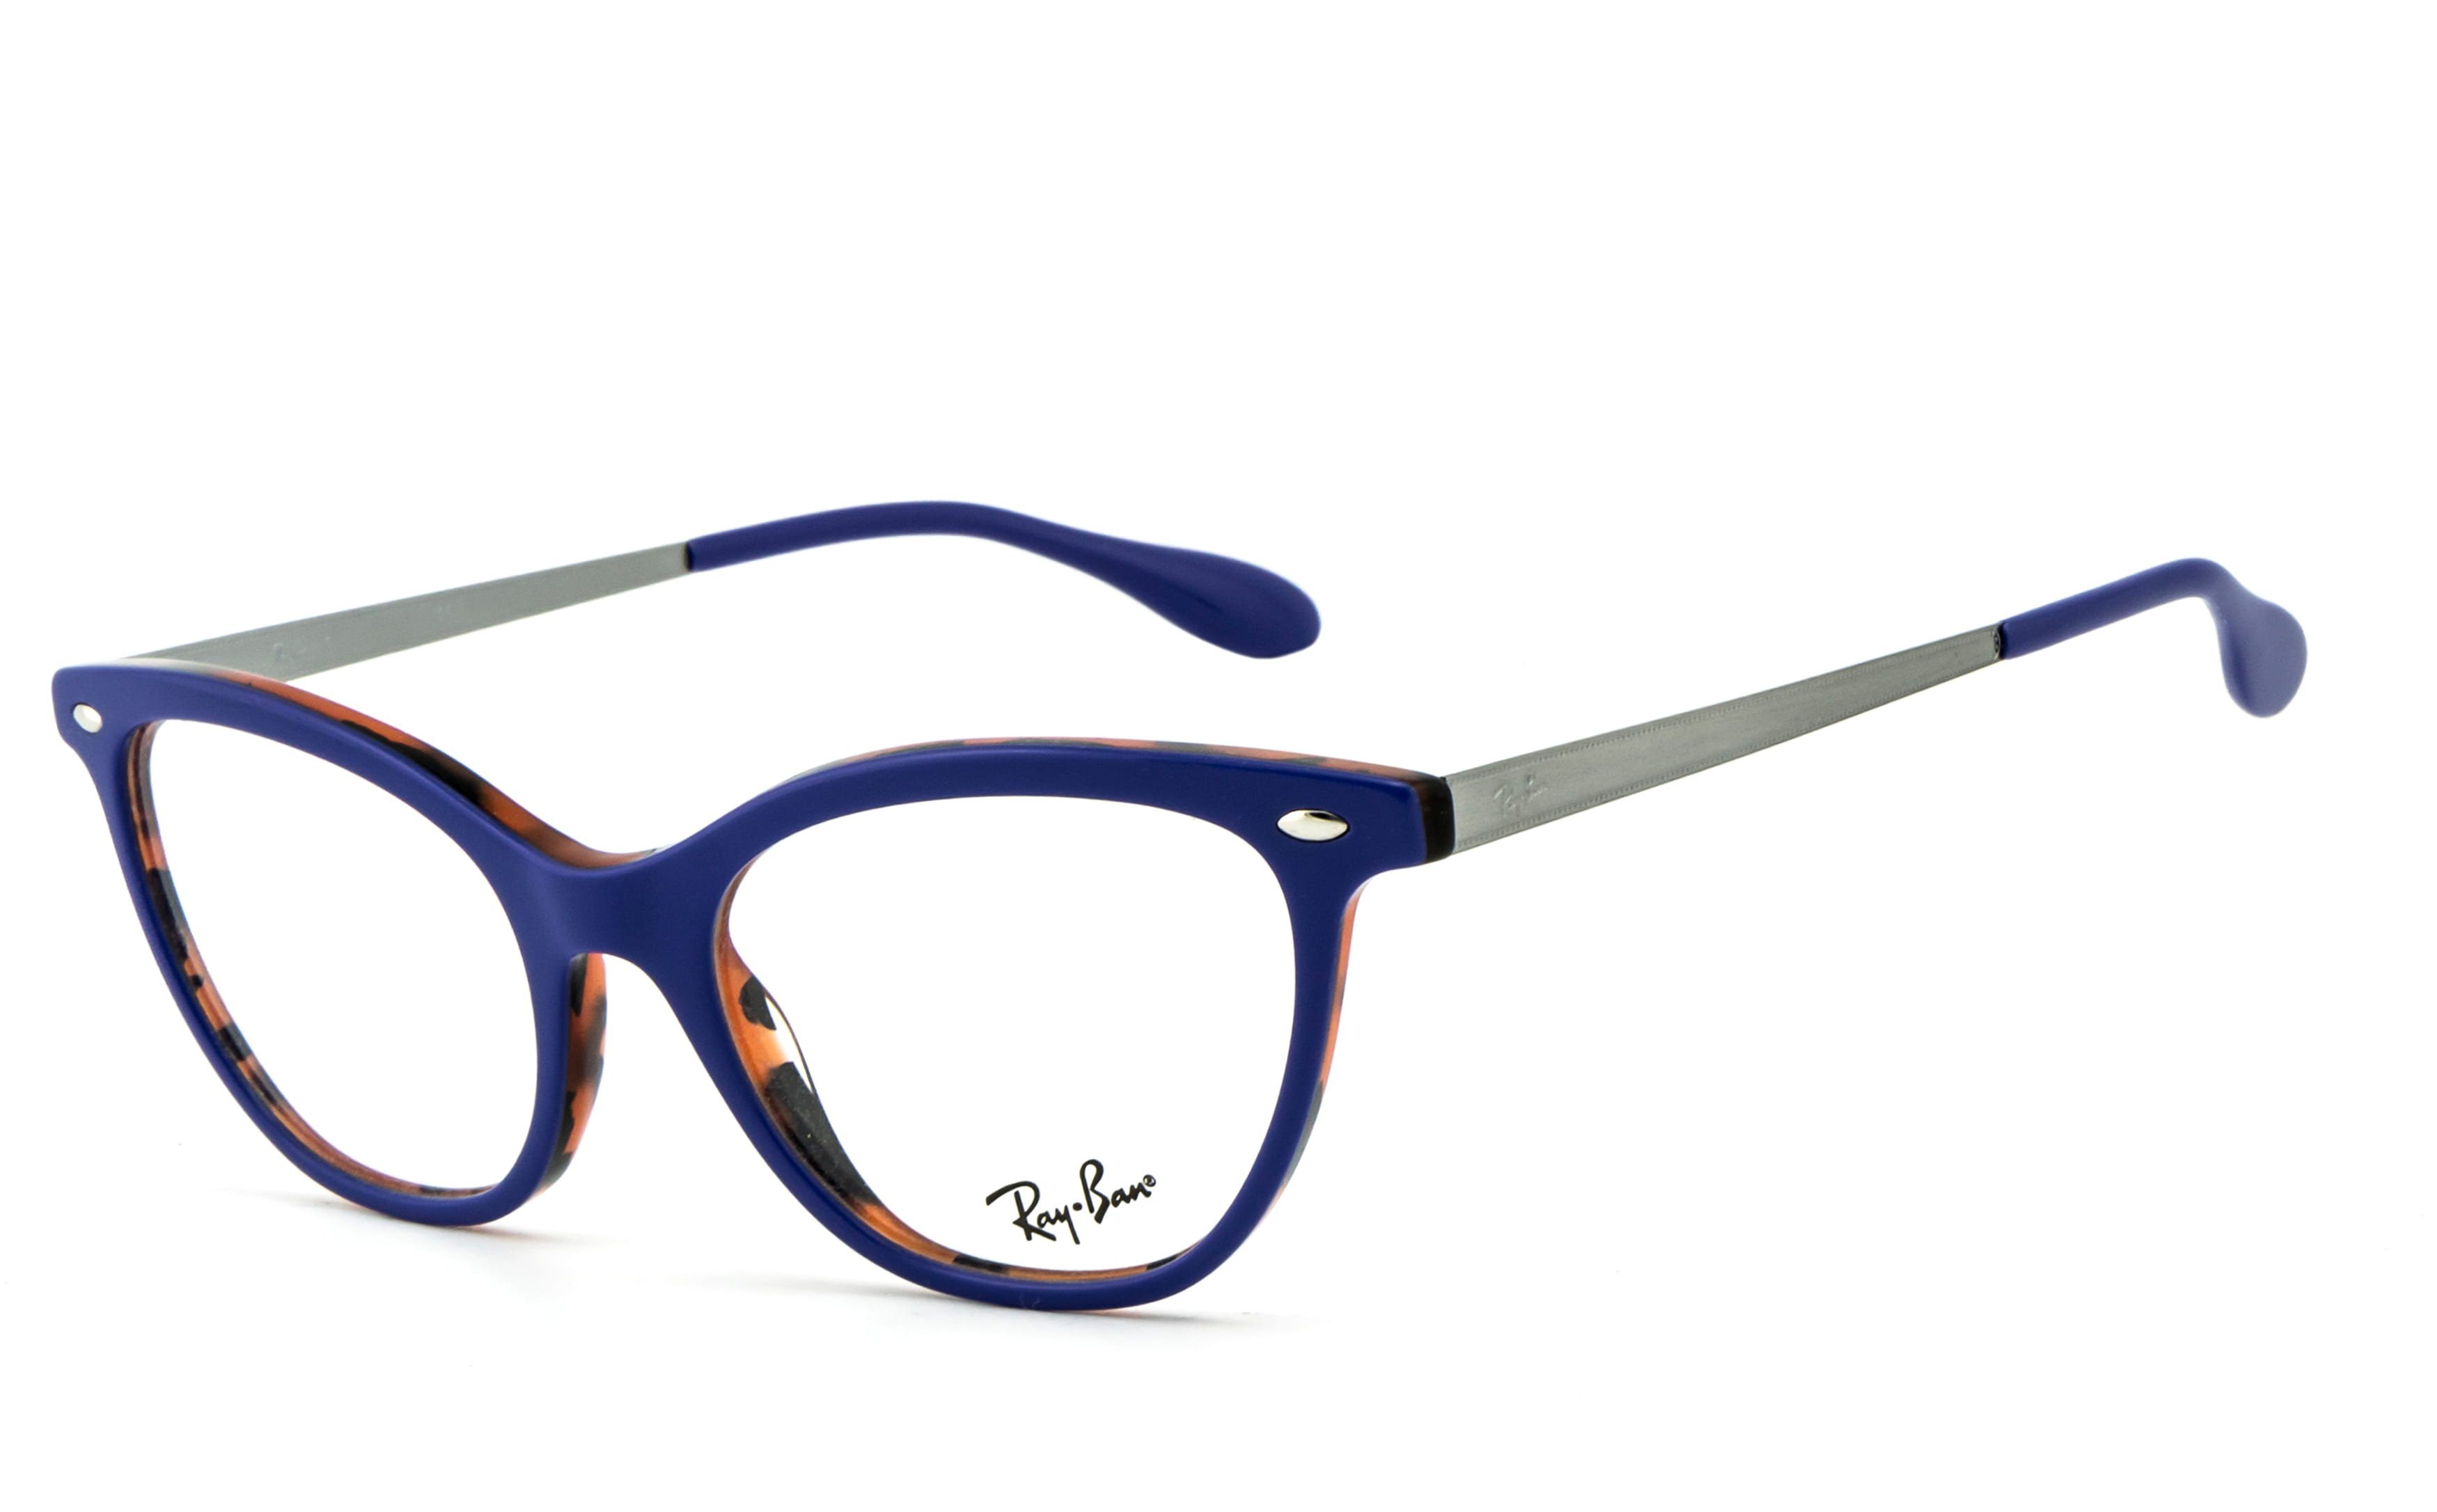 Ray-Ban Brille RB5360bl-n